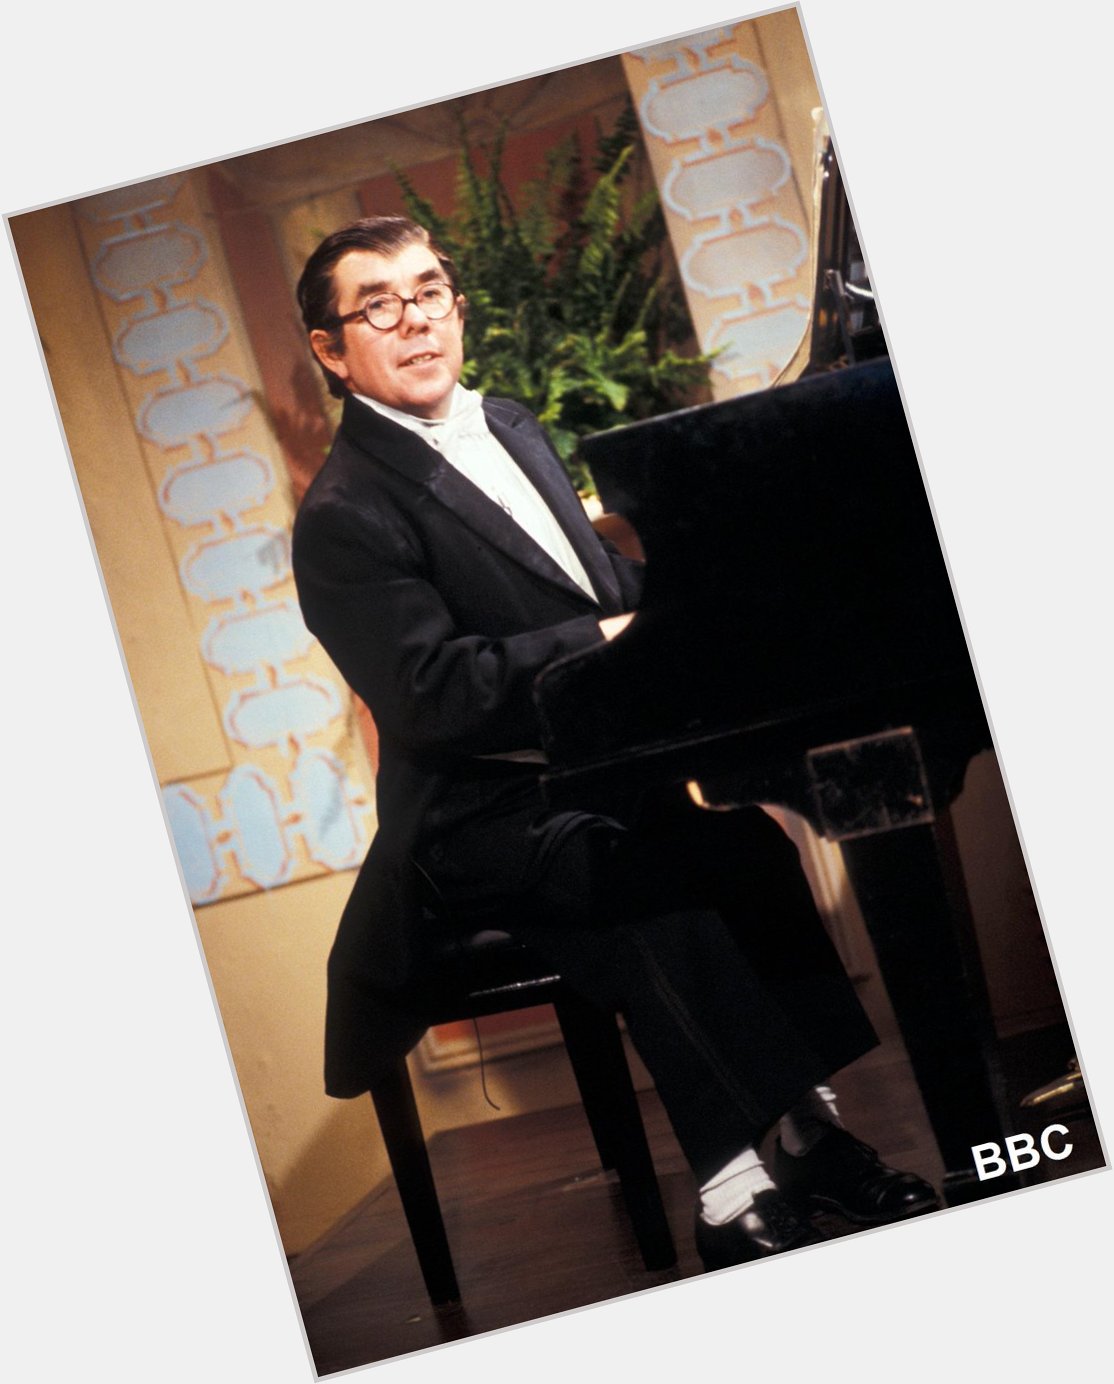 Happy Birthday Ronnie Corbett! And may you have many more. 